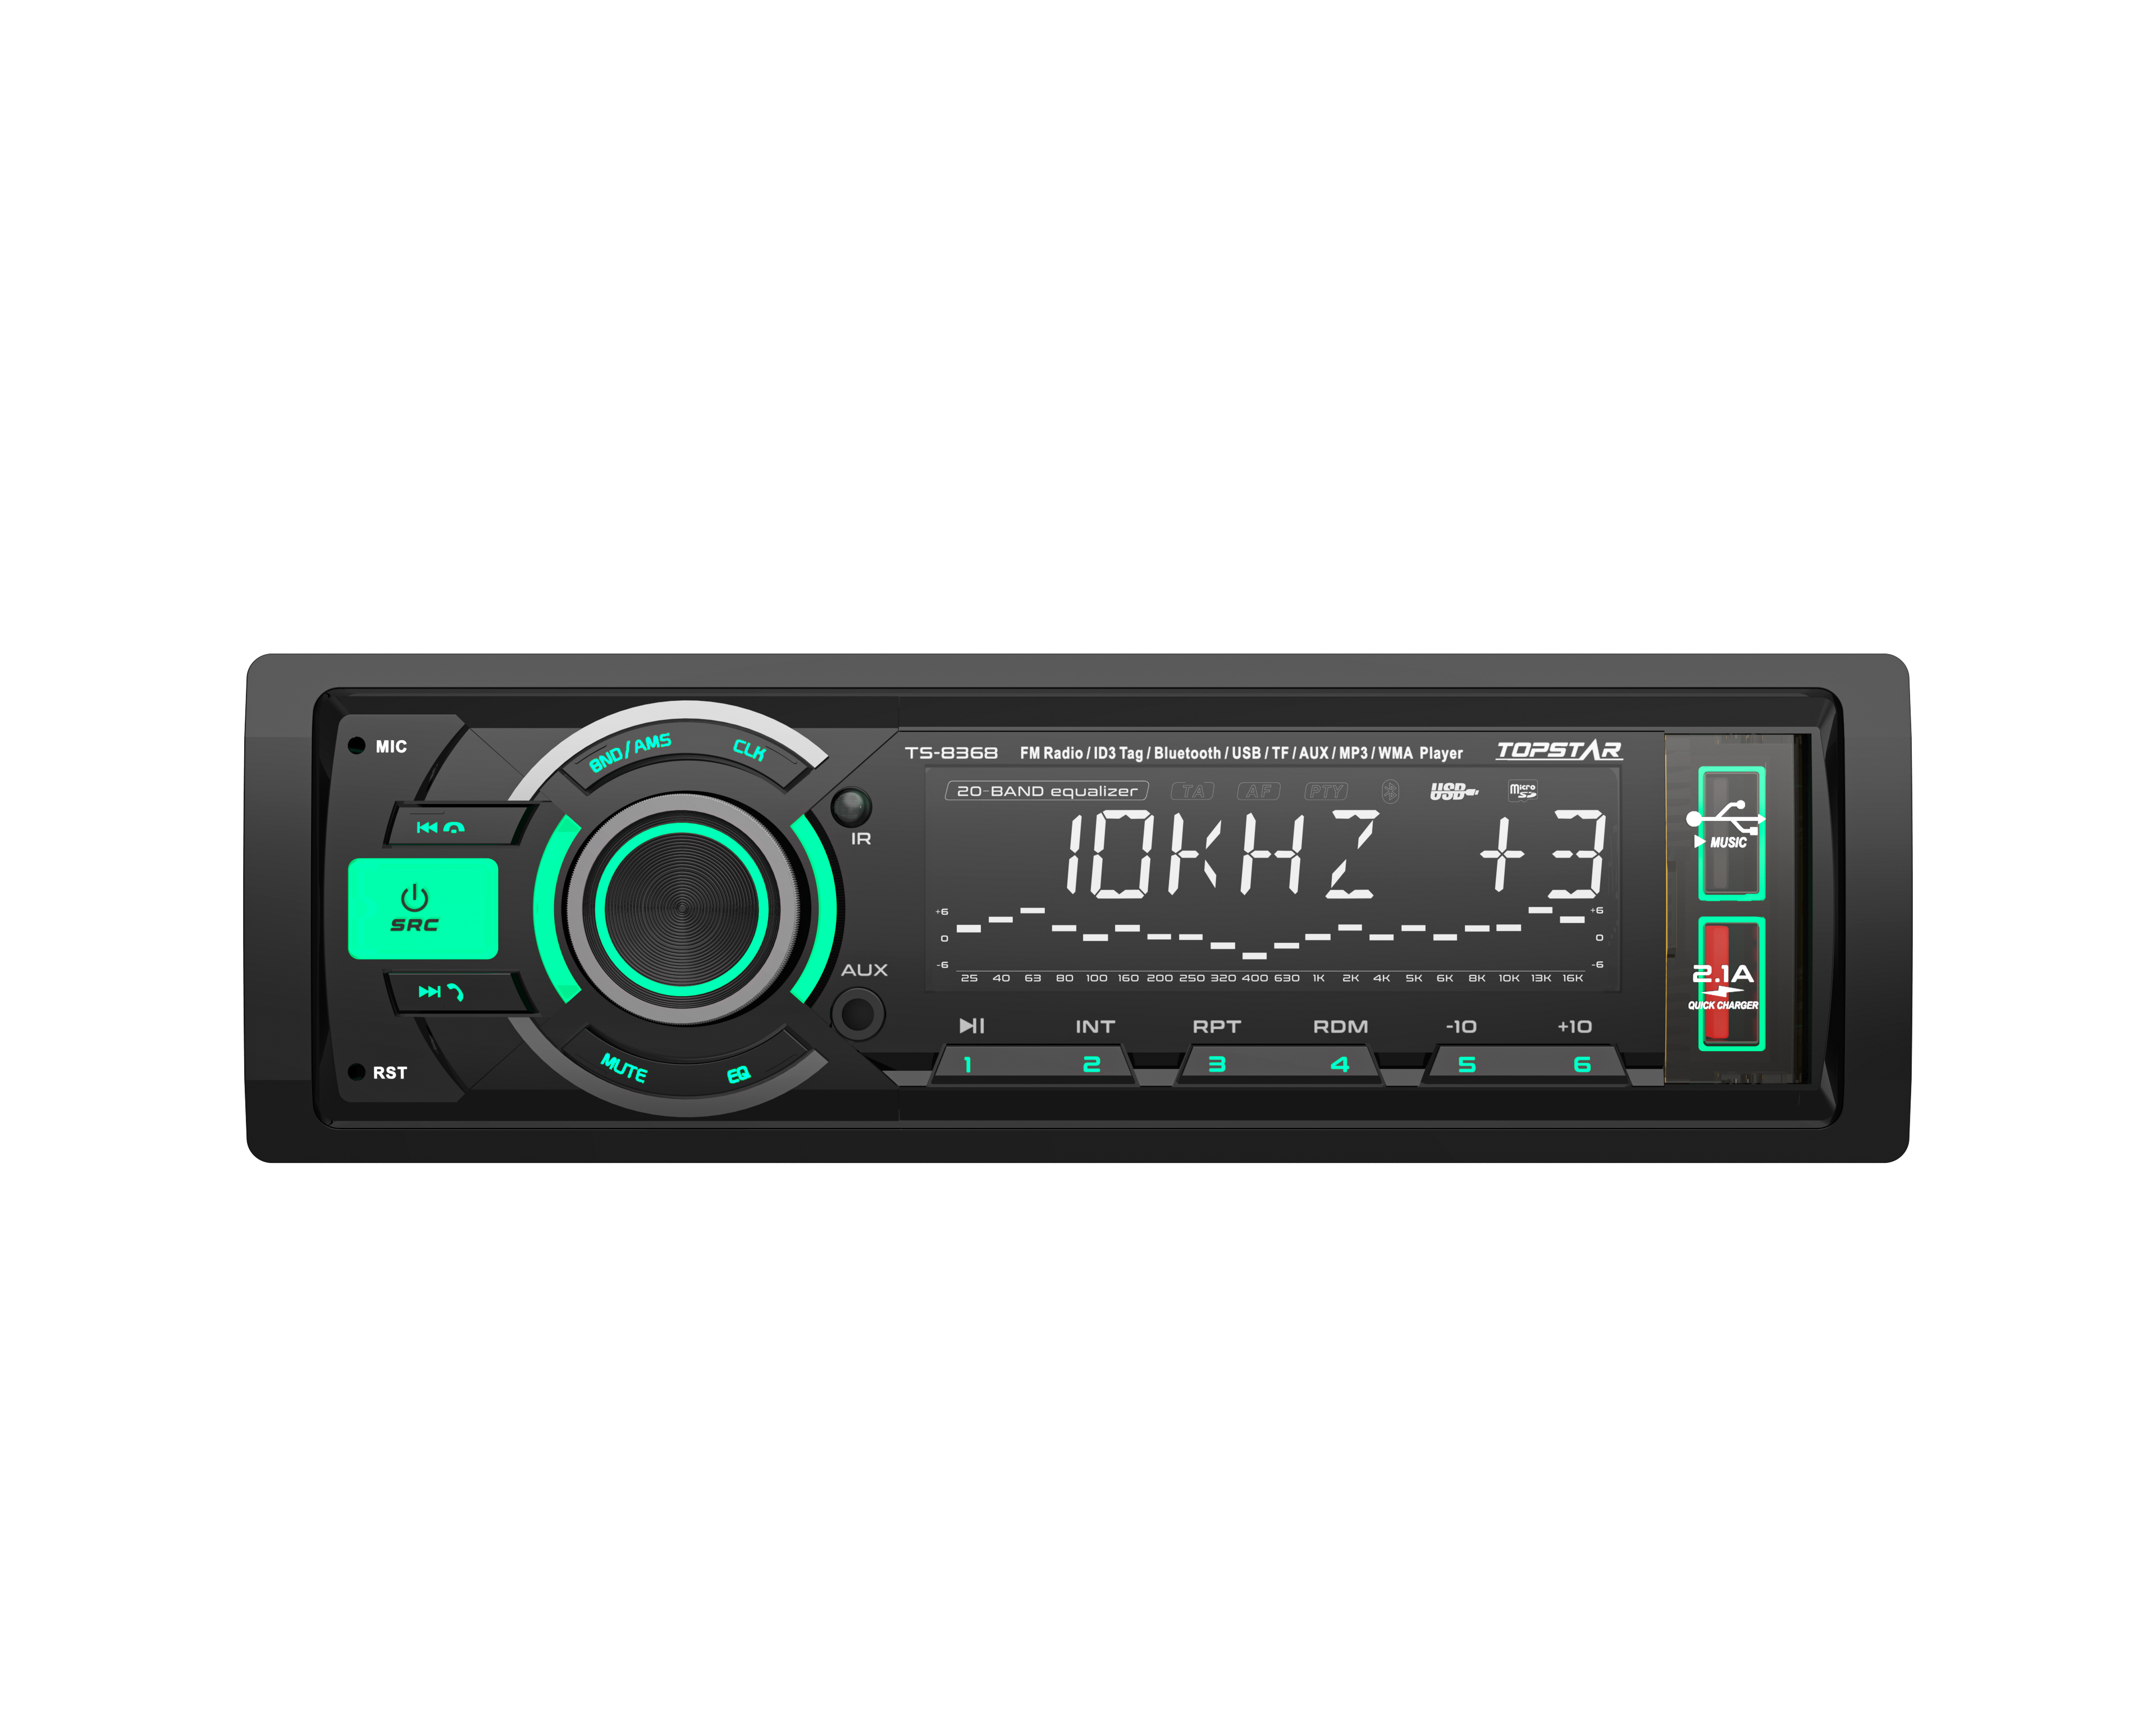 One Din Car Audio MP3 Player with Bluetooth